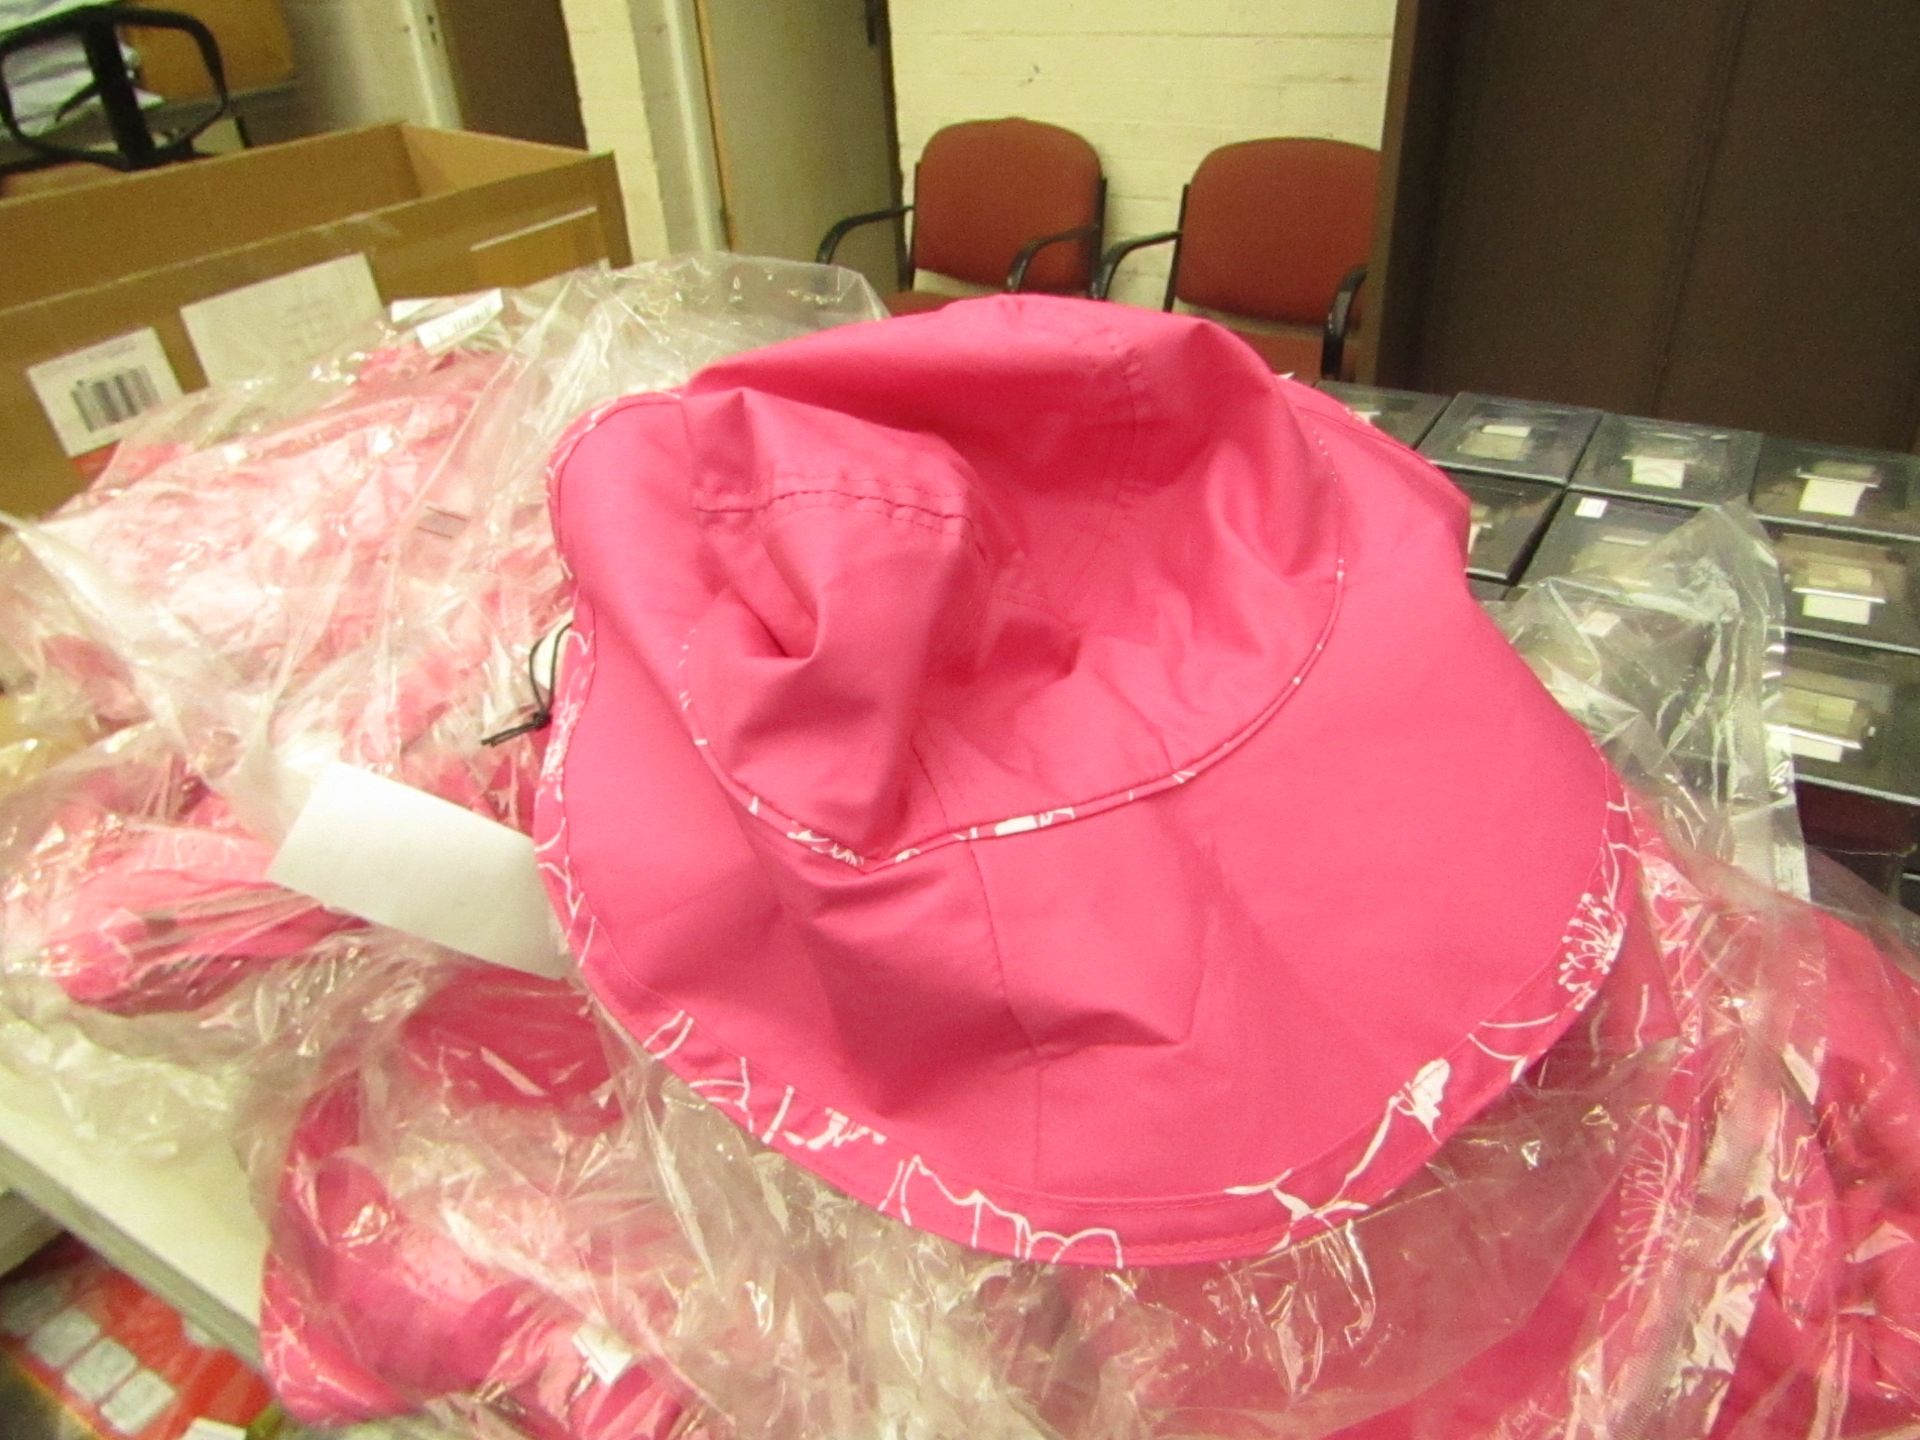 2x Packs of 3 - Costa Hat (Pink & White) - Packaged.